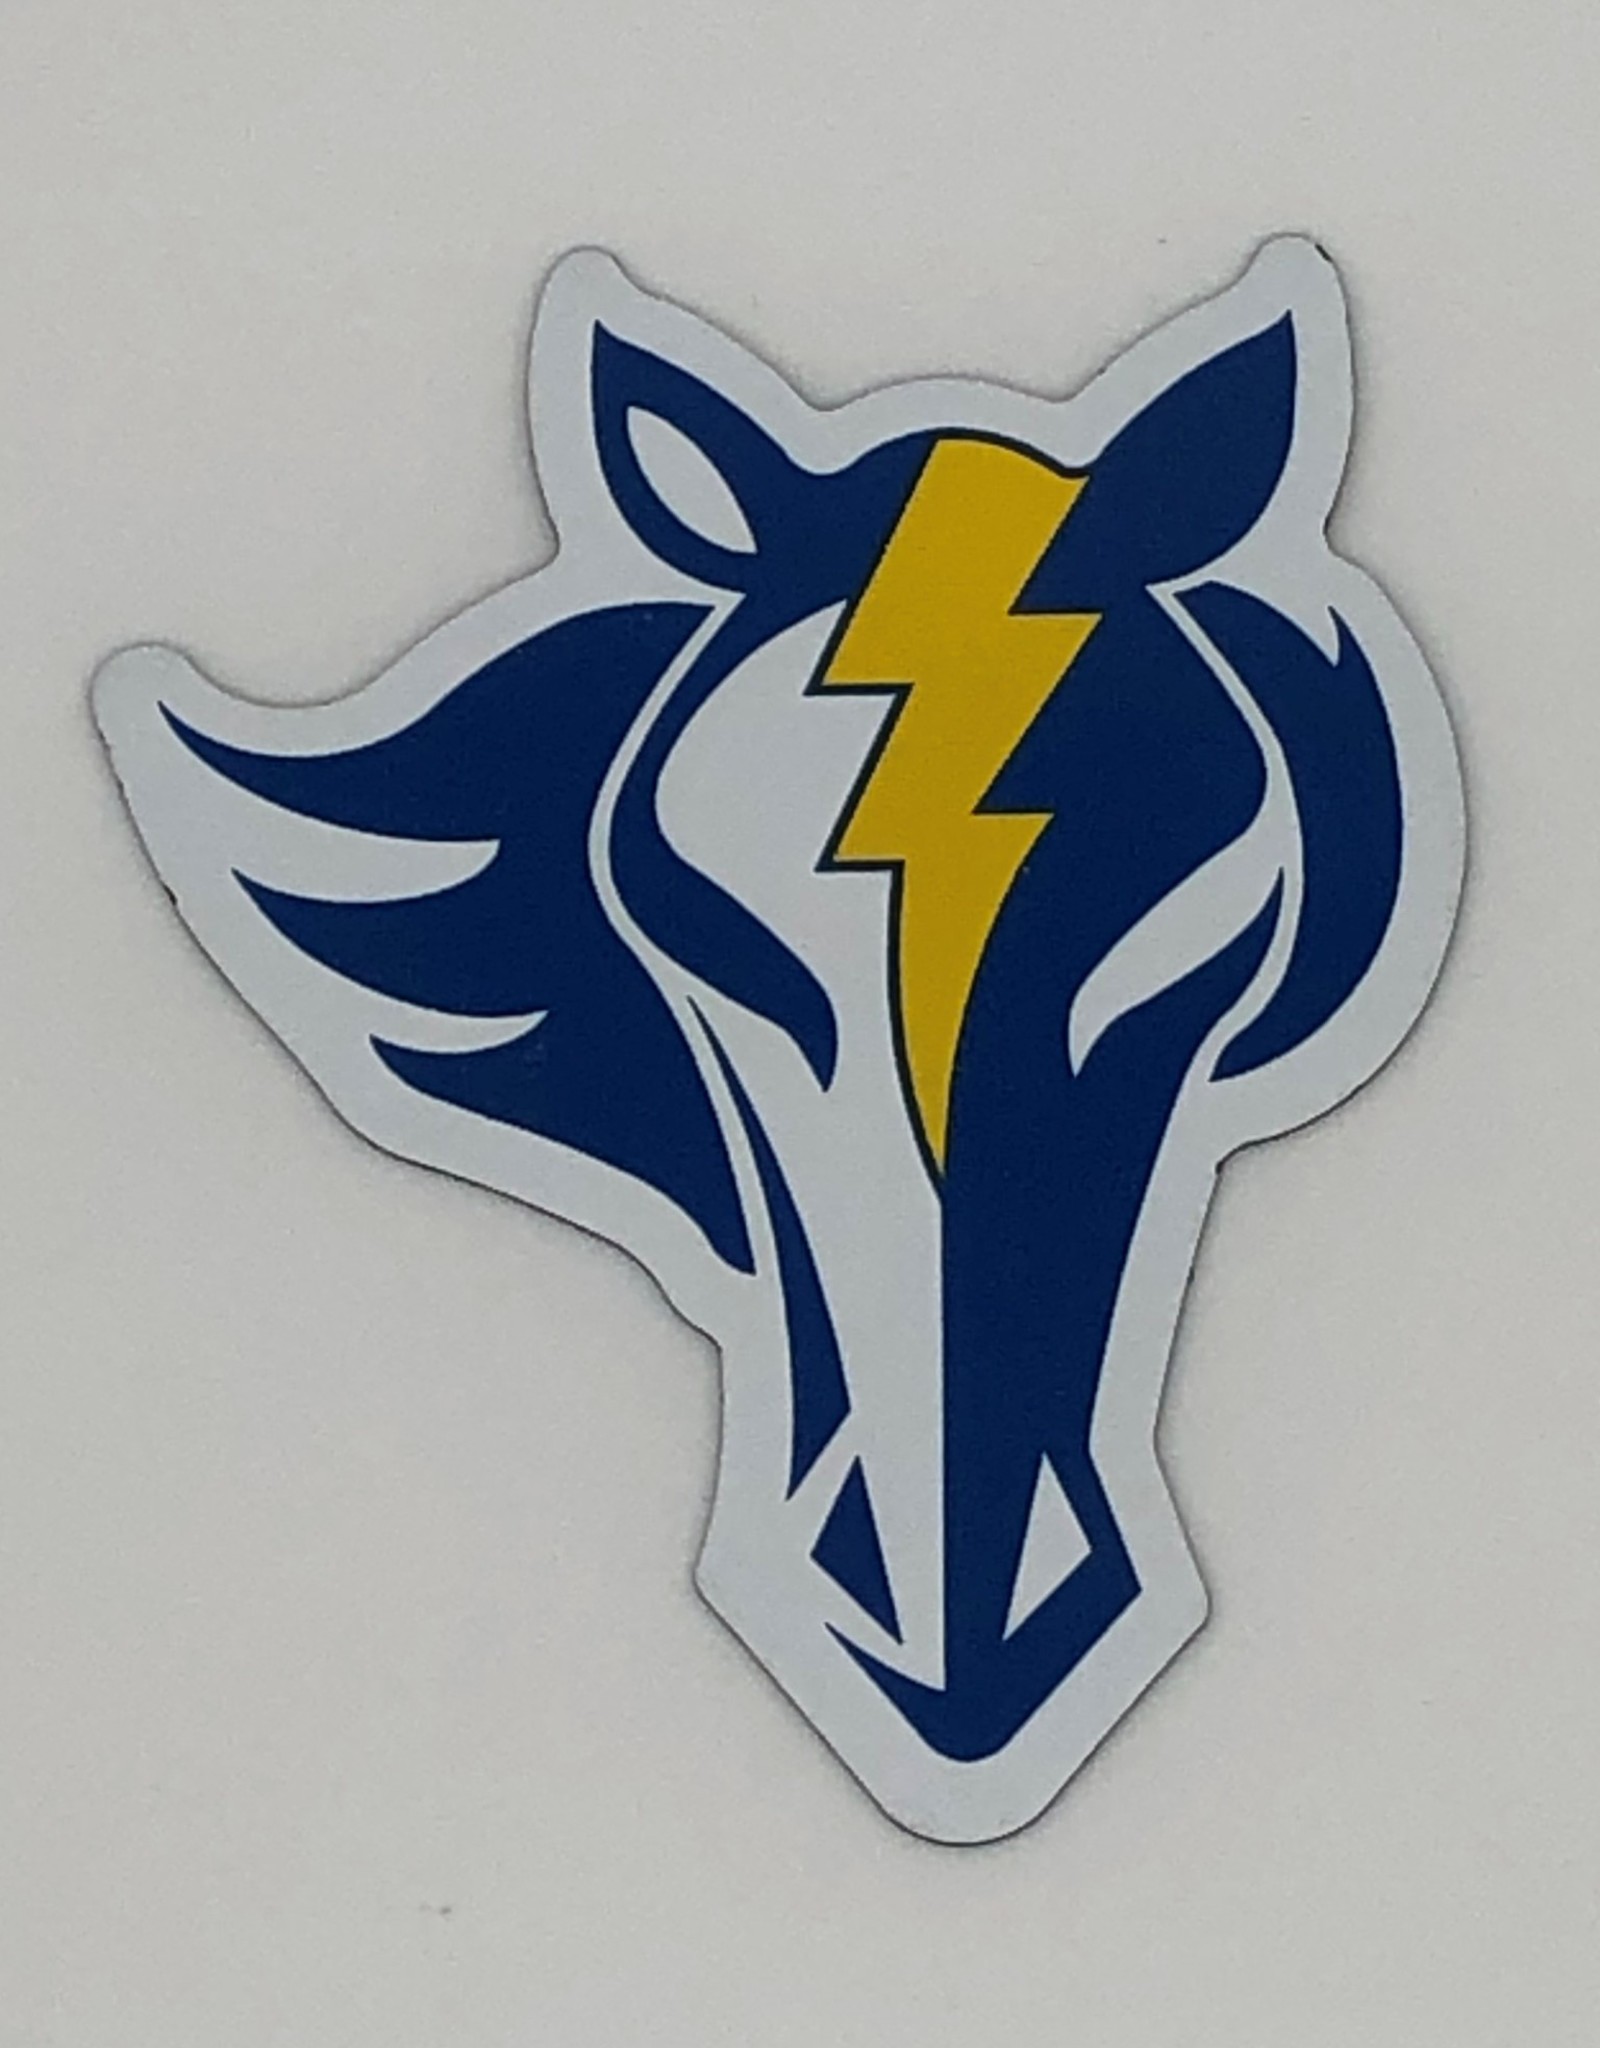 Charger Head Car Magnet